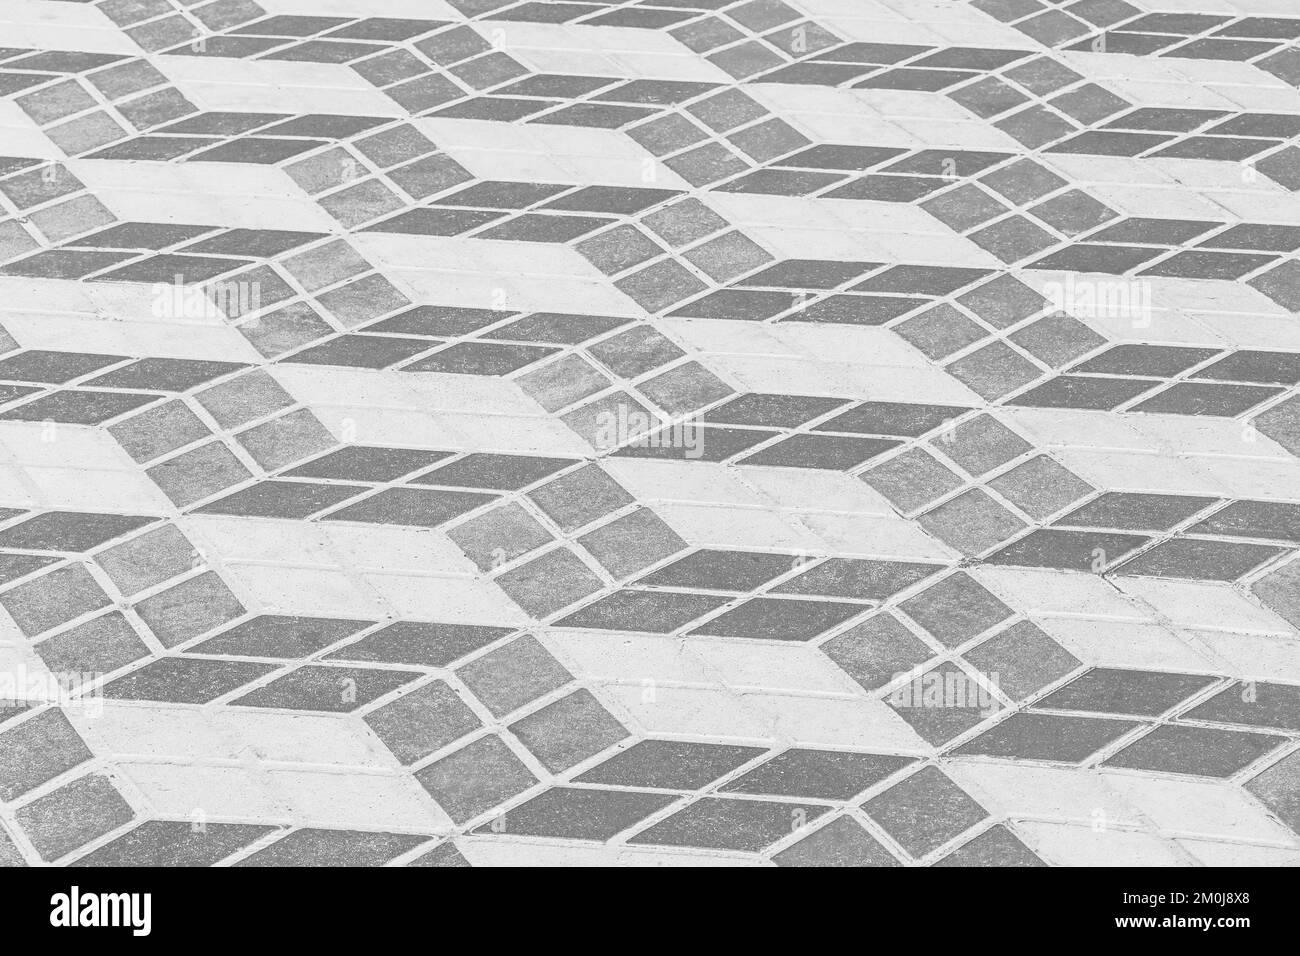 Dark and light sidewalk tile with abstract geometric square pattern paving slab texture street road urban background. Stock Photo